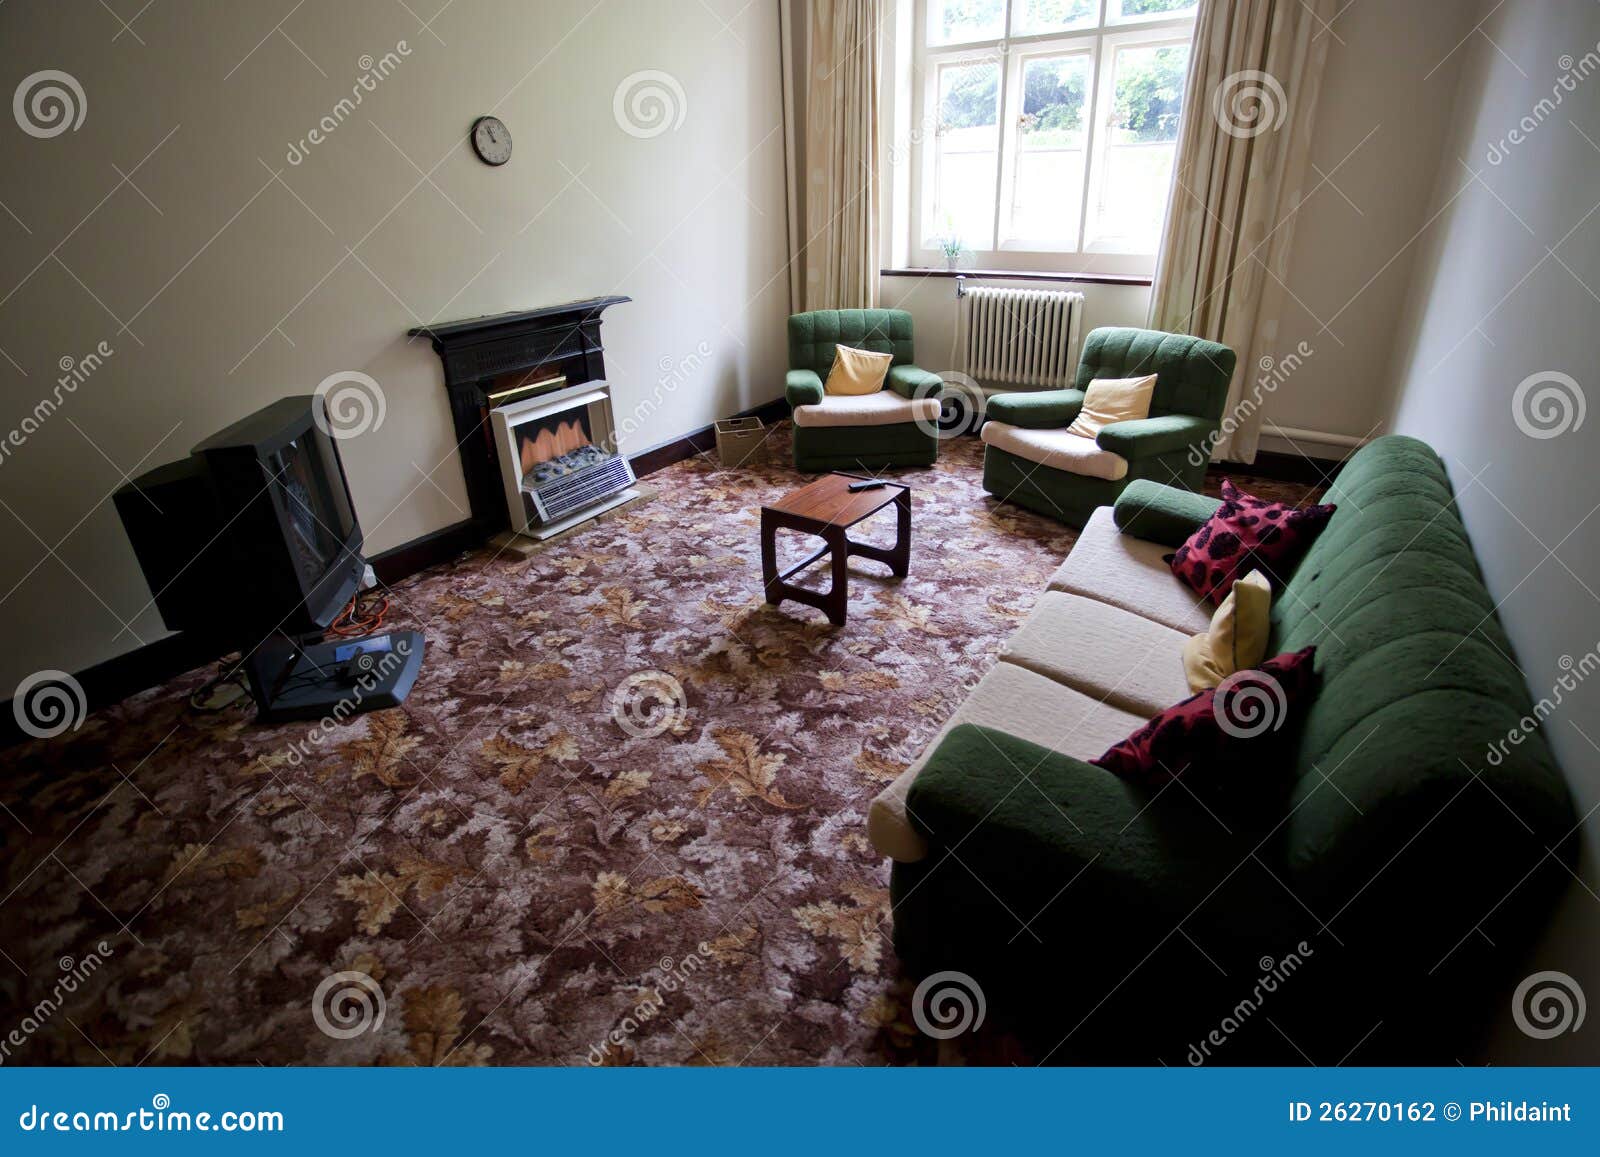 Old Style Living Room Stock Photography Image 26270162